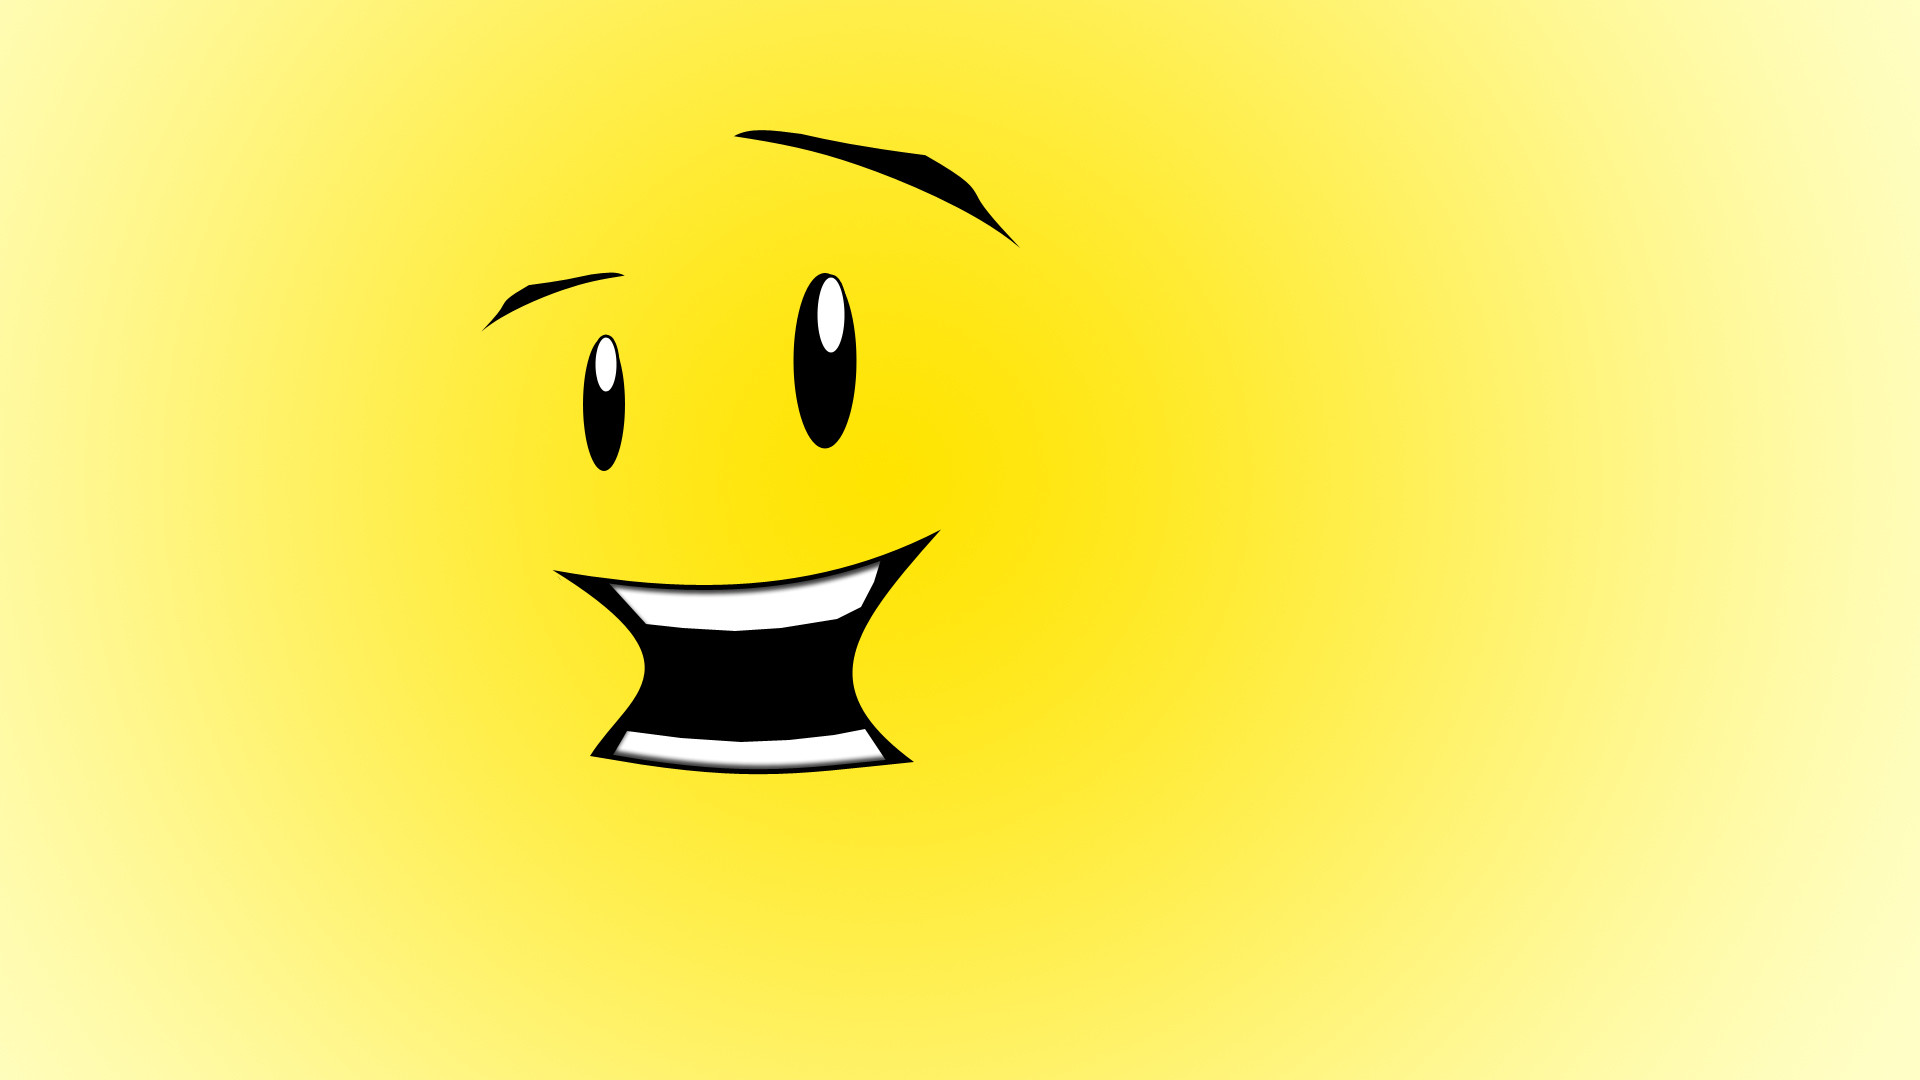 1920x1080 Smiley Awesome 3d Smiley Wallpaper Funny Smileys Faces Smiley Face. Smily  Face 3d - Clipart library